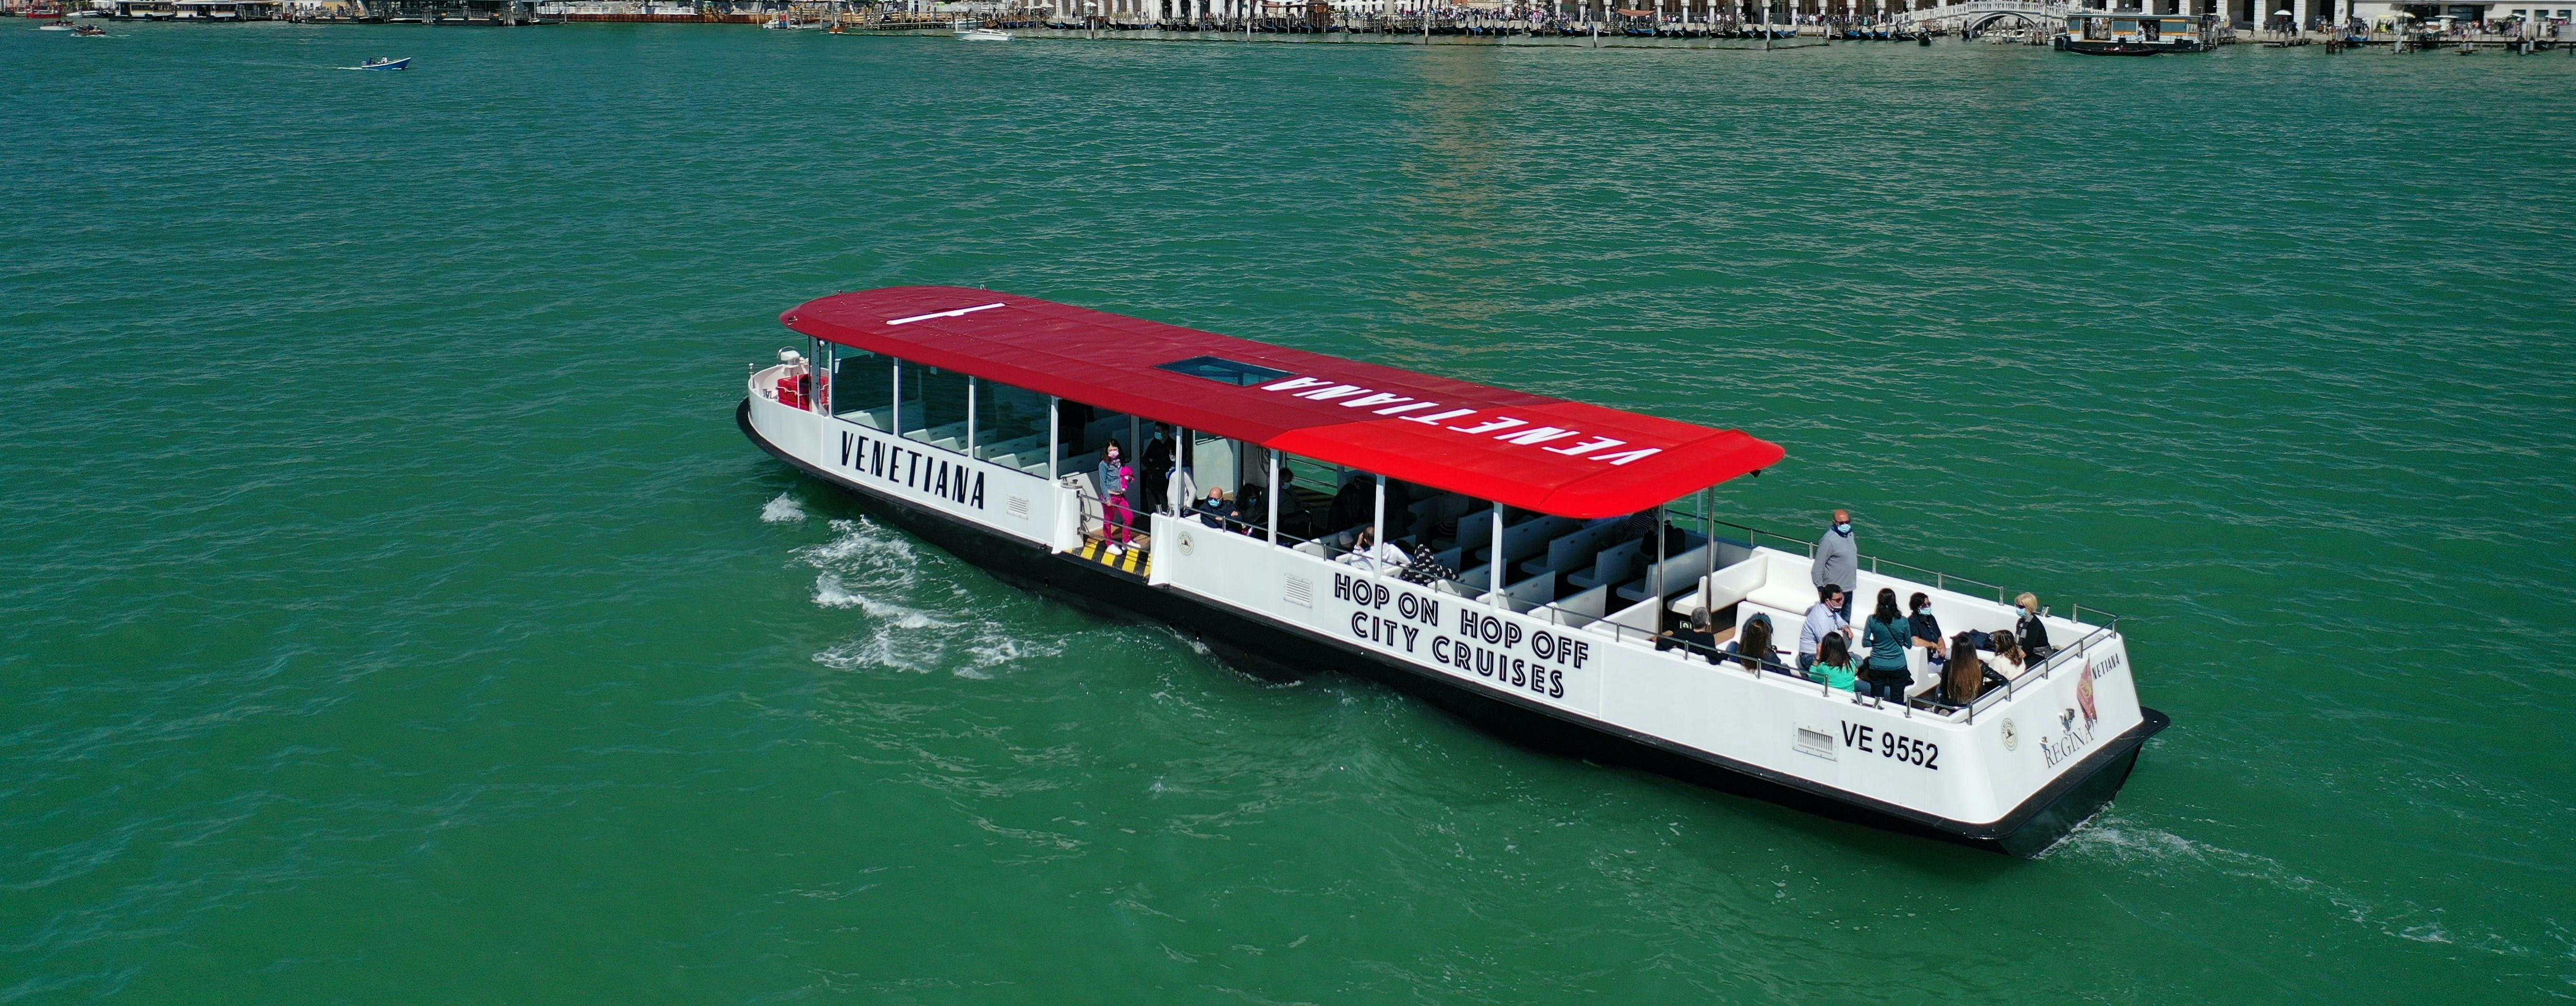 Venice hop on off eco boat tour with audio guide Musement